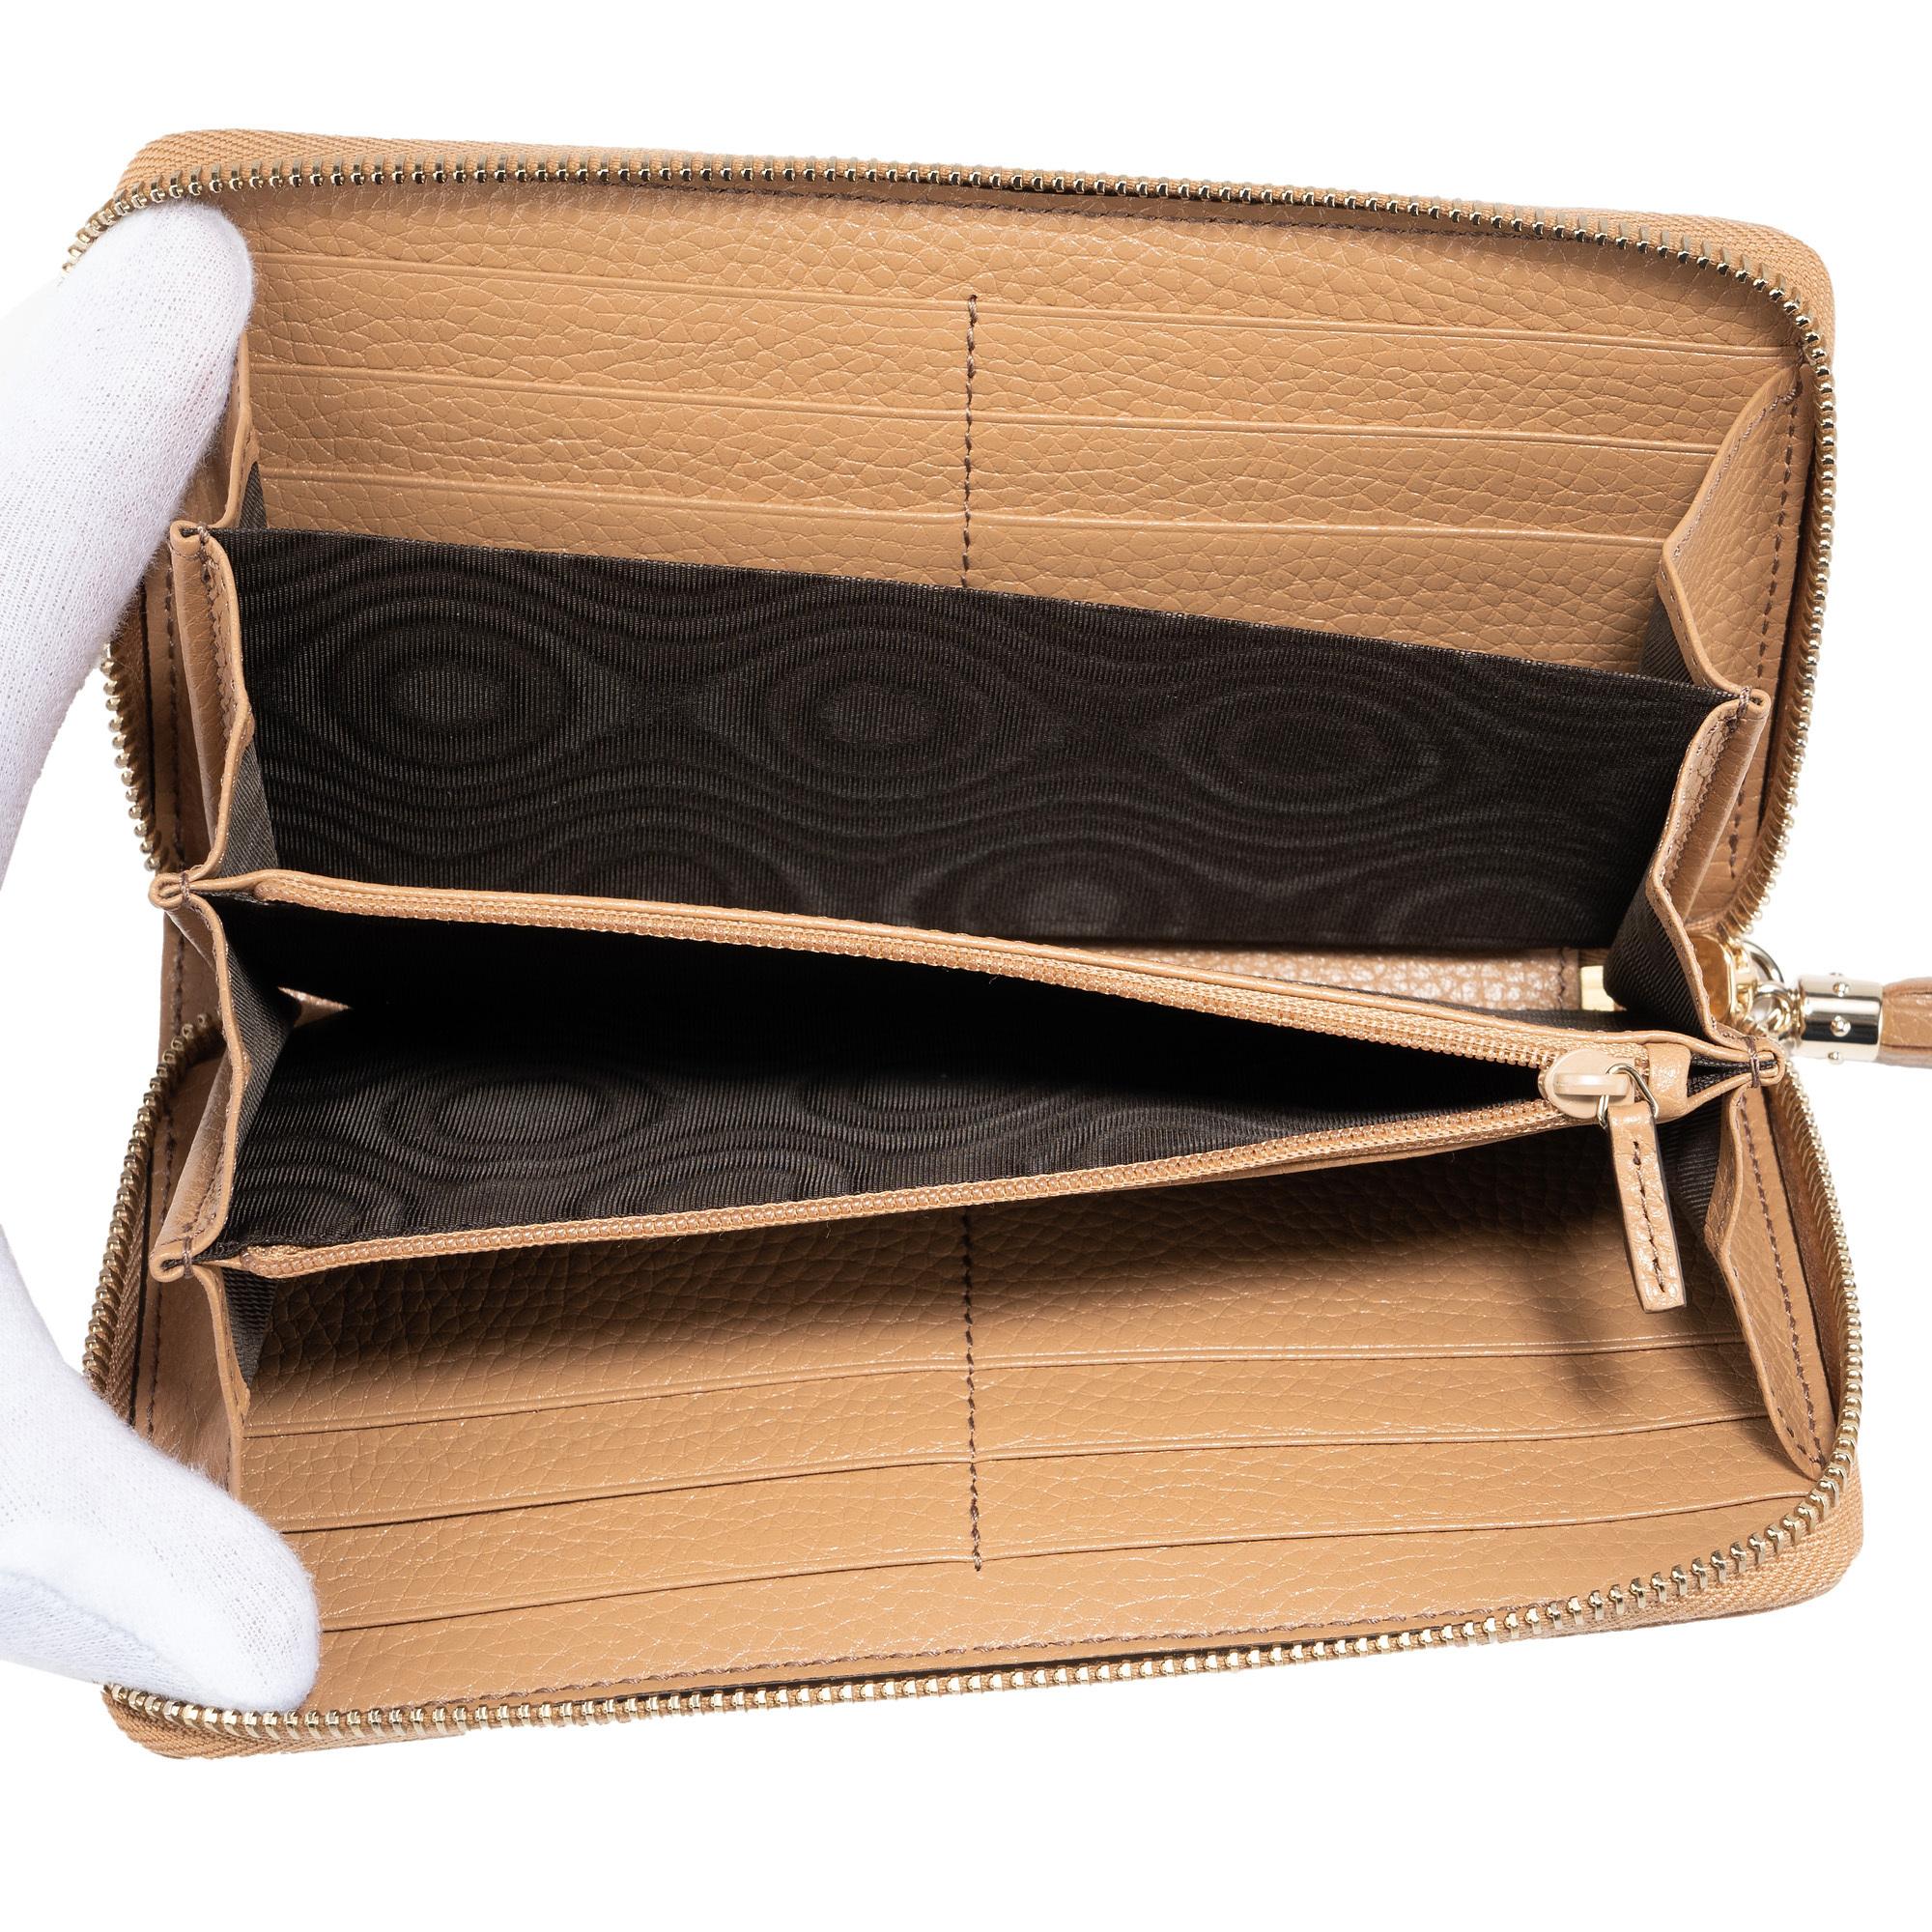 Women's NEW Gucci Beige Soho Leather Zip Around Long Wallet Clutch Bag For Sale